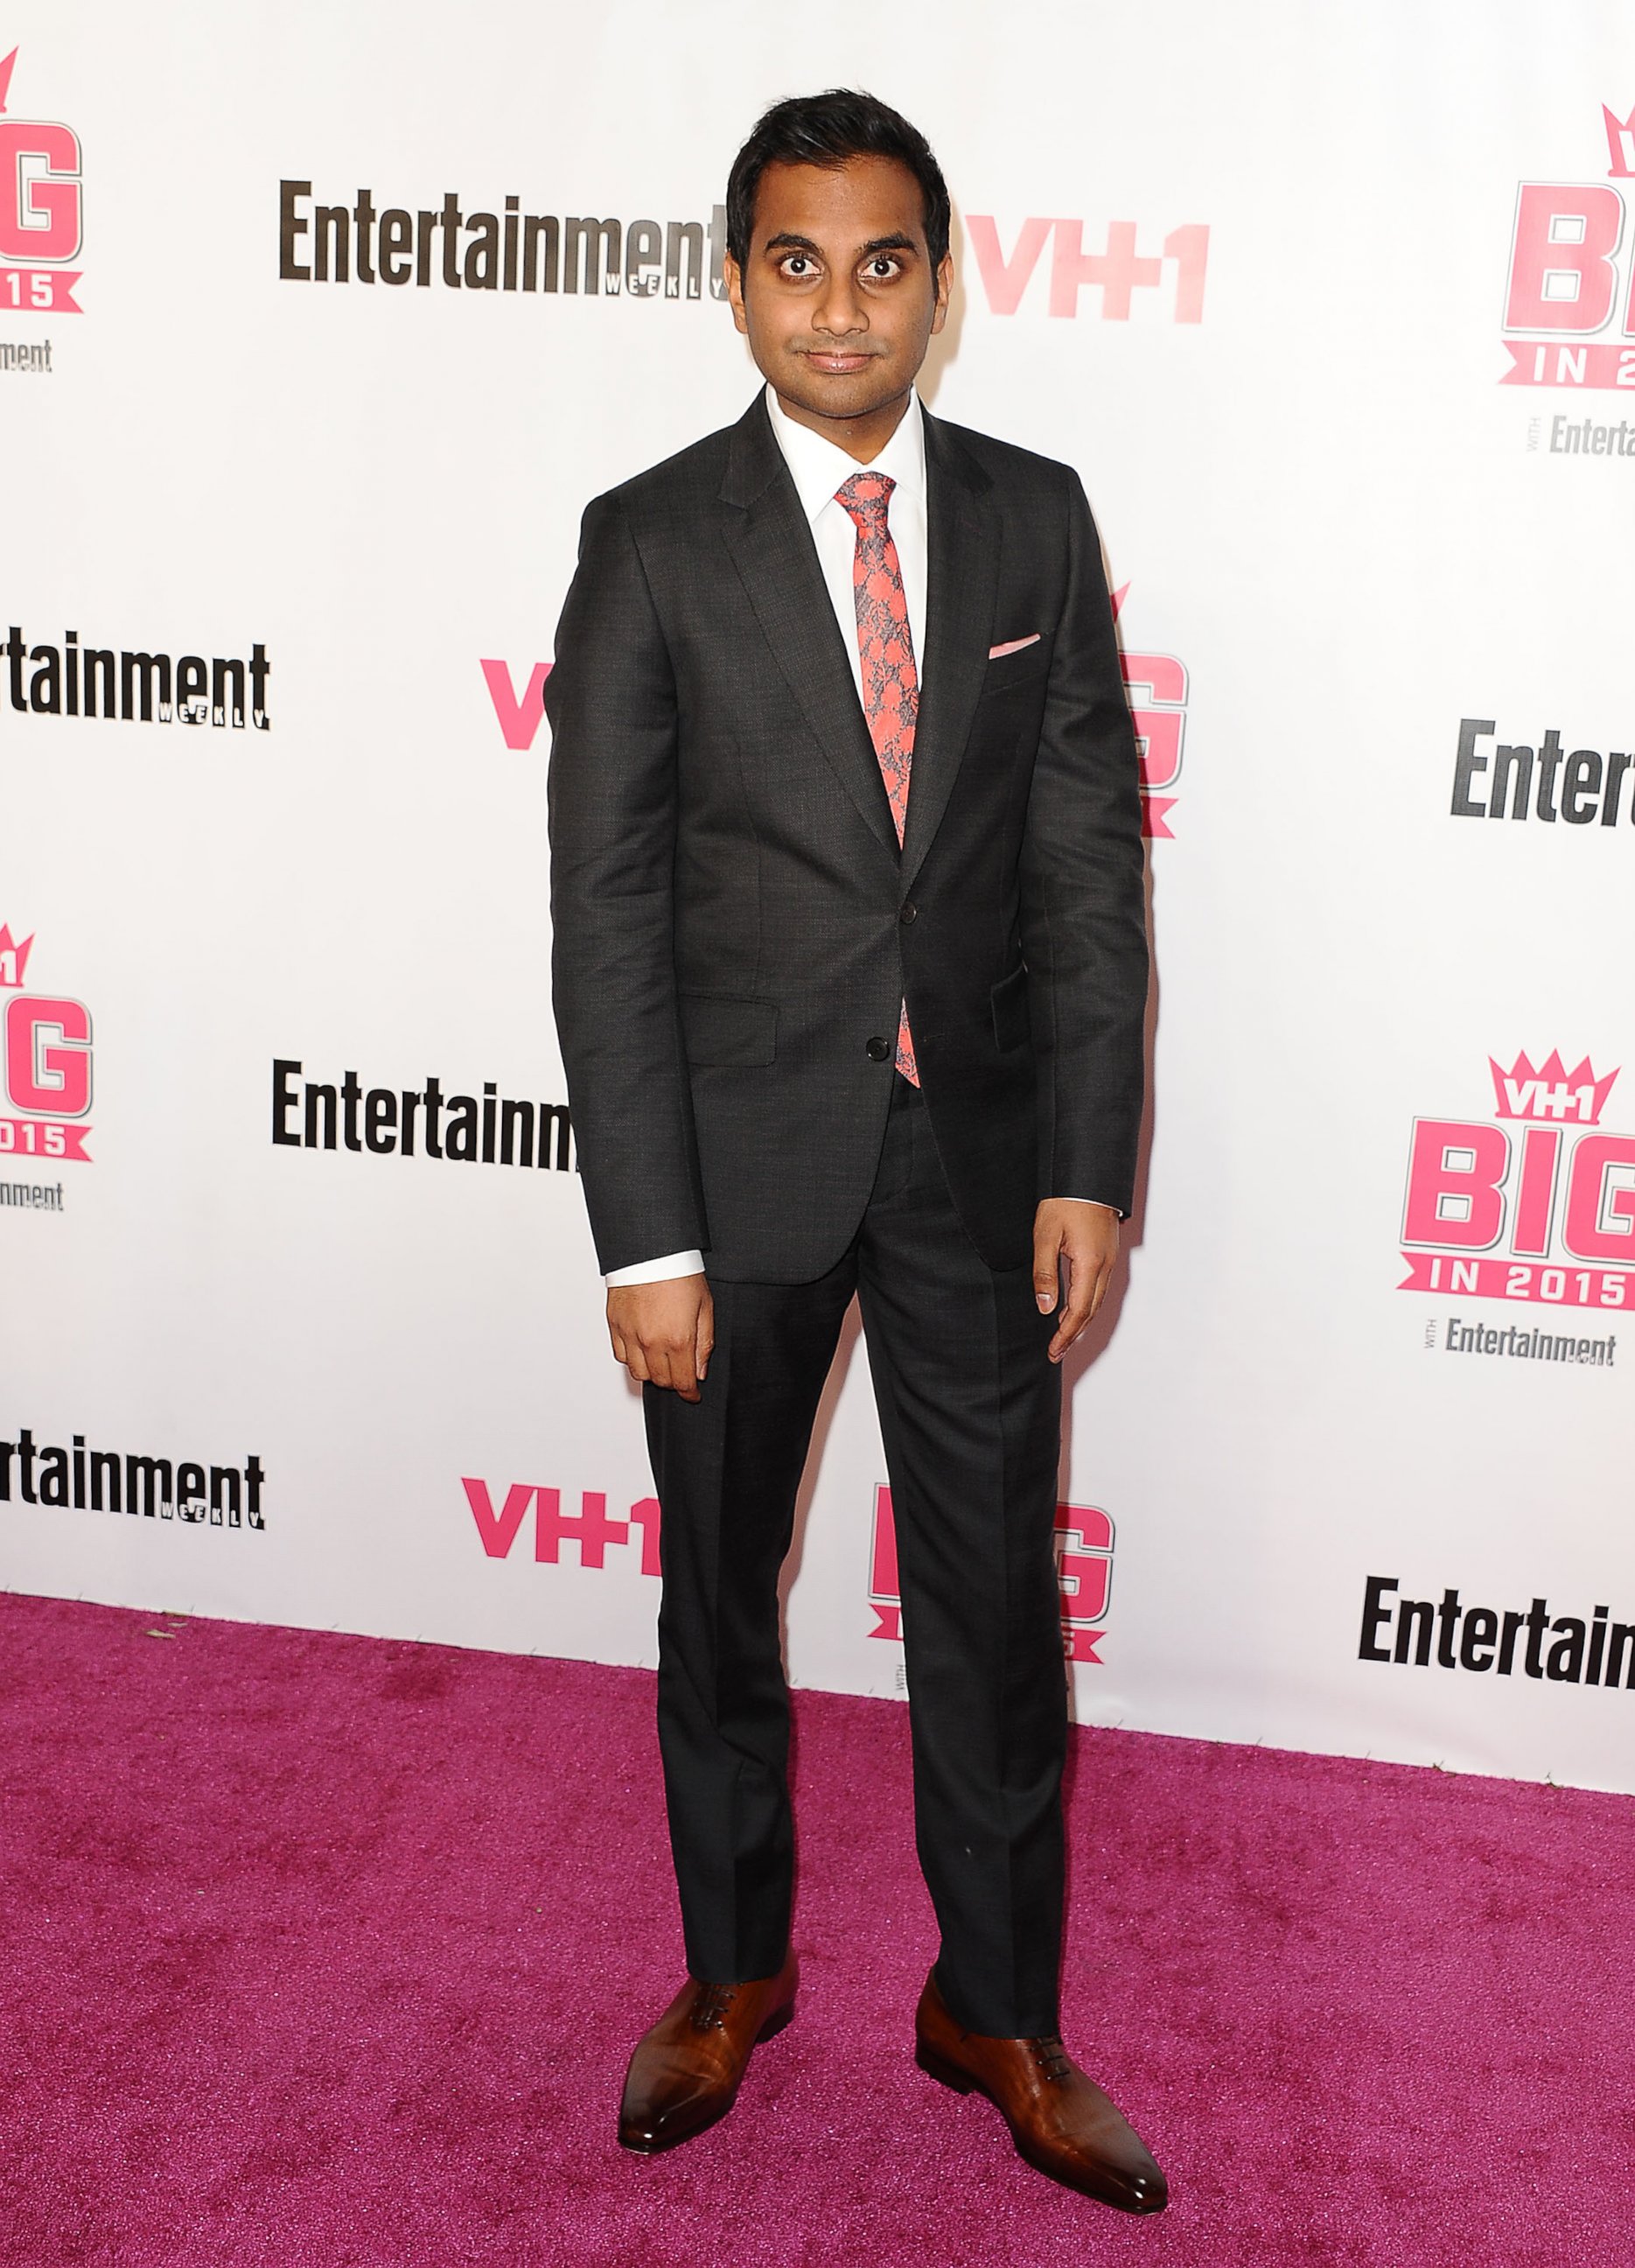 PHOTO: Aziz Ansari attends the VH1 Big In 2015 with Entertainment Weekly Awards on Nov. 15, 2015 in West Hollywood, Calif. 